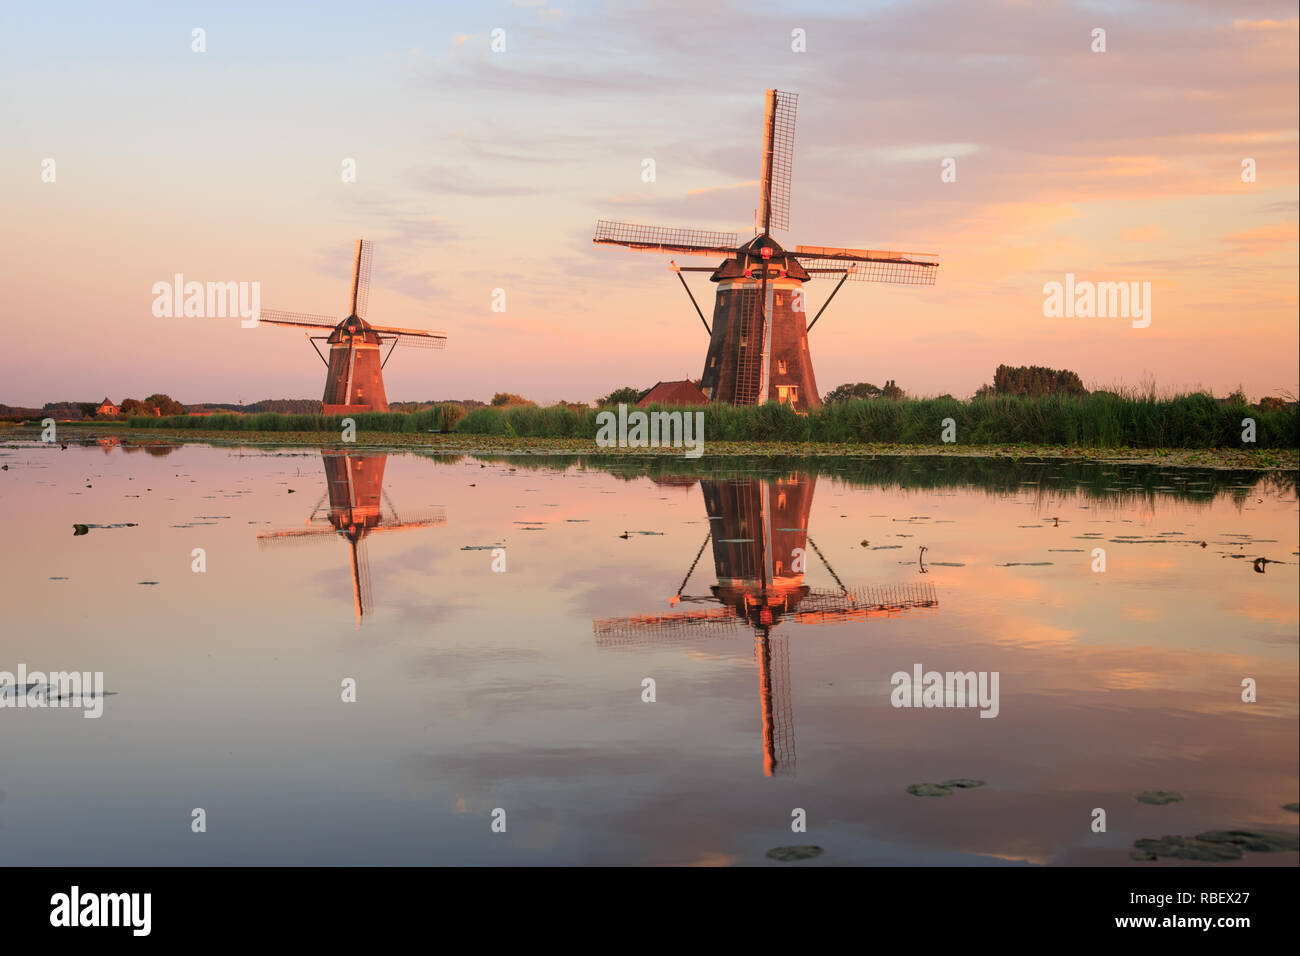 Summer evening sunset in the dutch countryside with the reflection of two traditional thatched windmills in the water in Leidschendam, the Netherlands Stock Photo